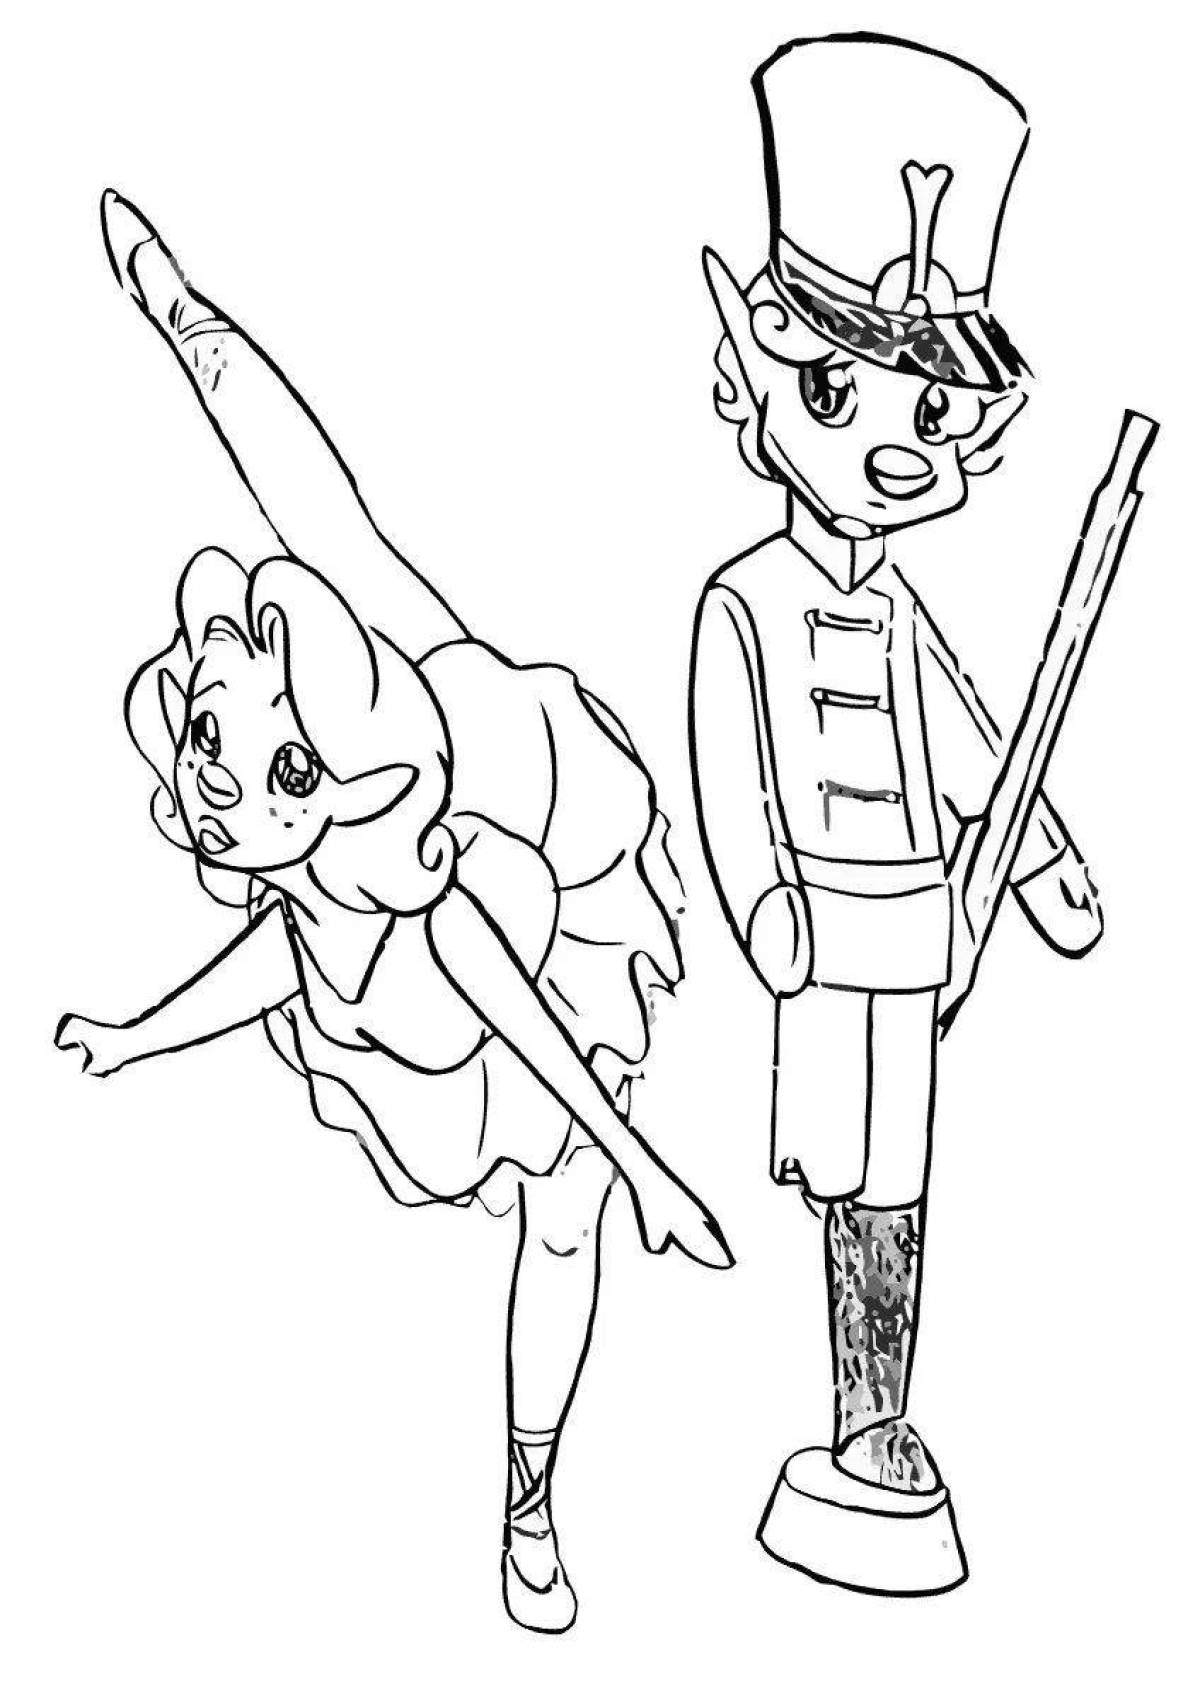 Tin Soldier coloring page charm